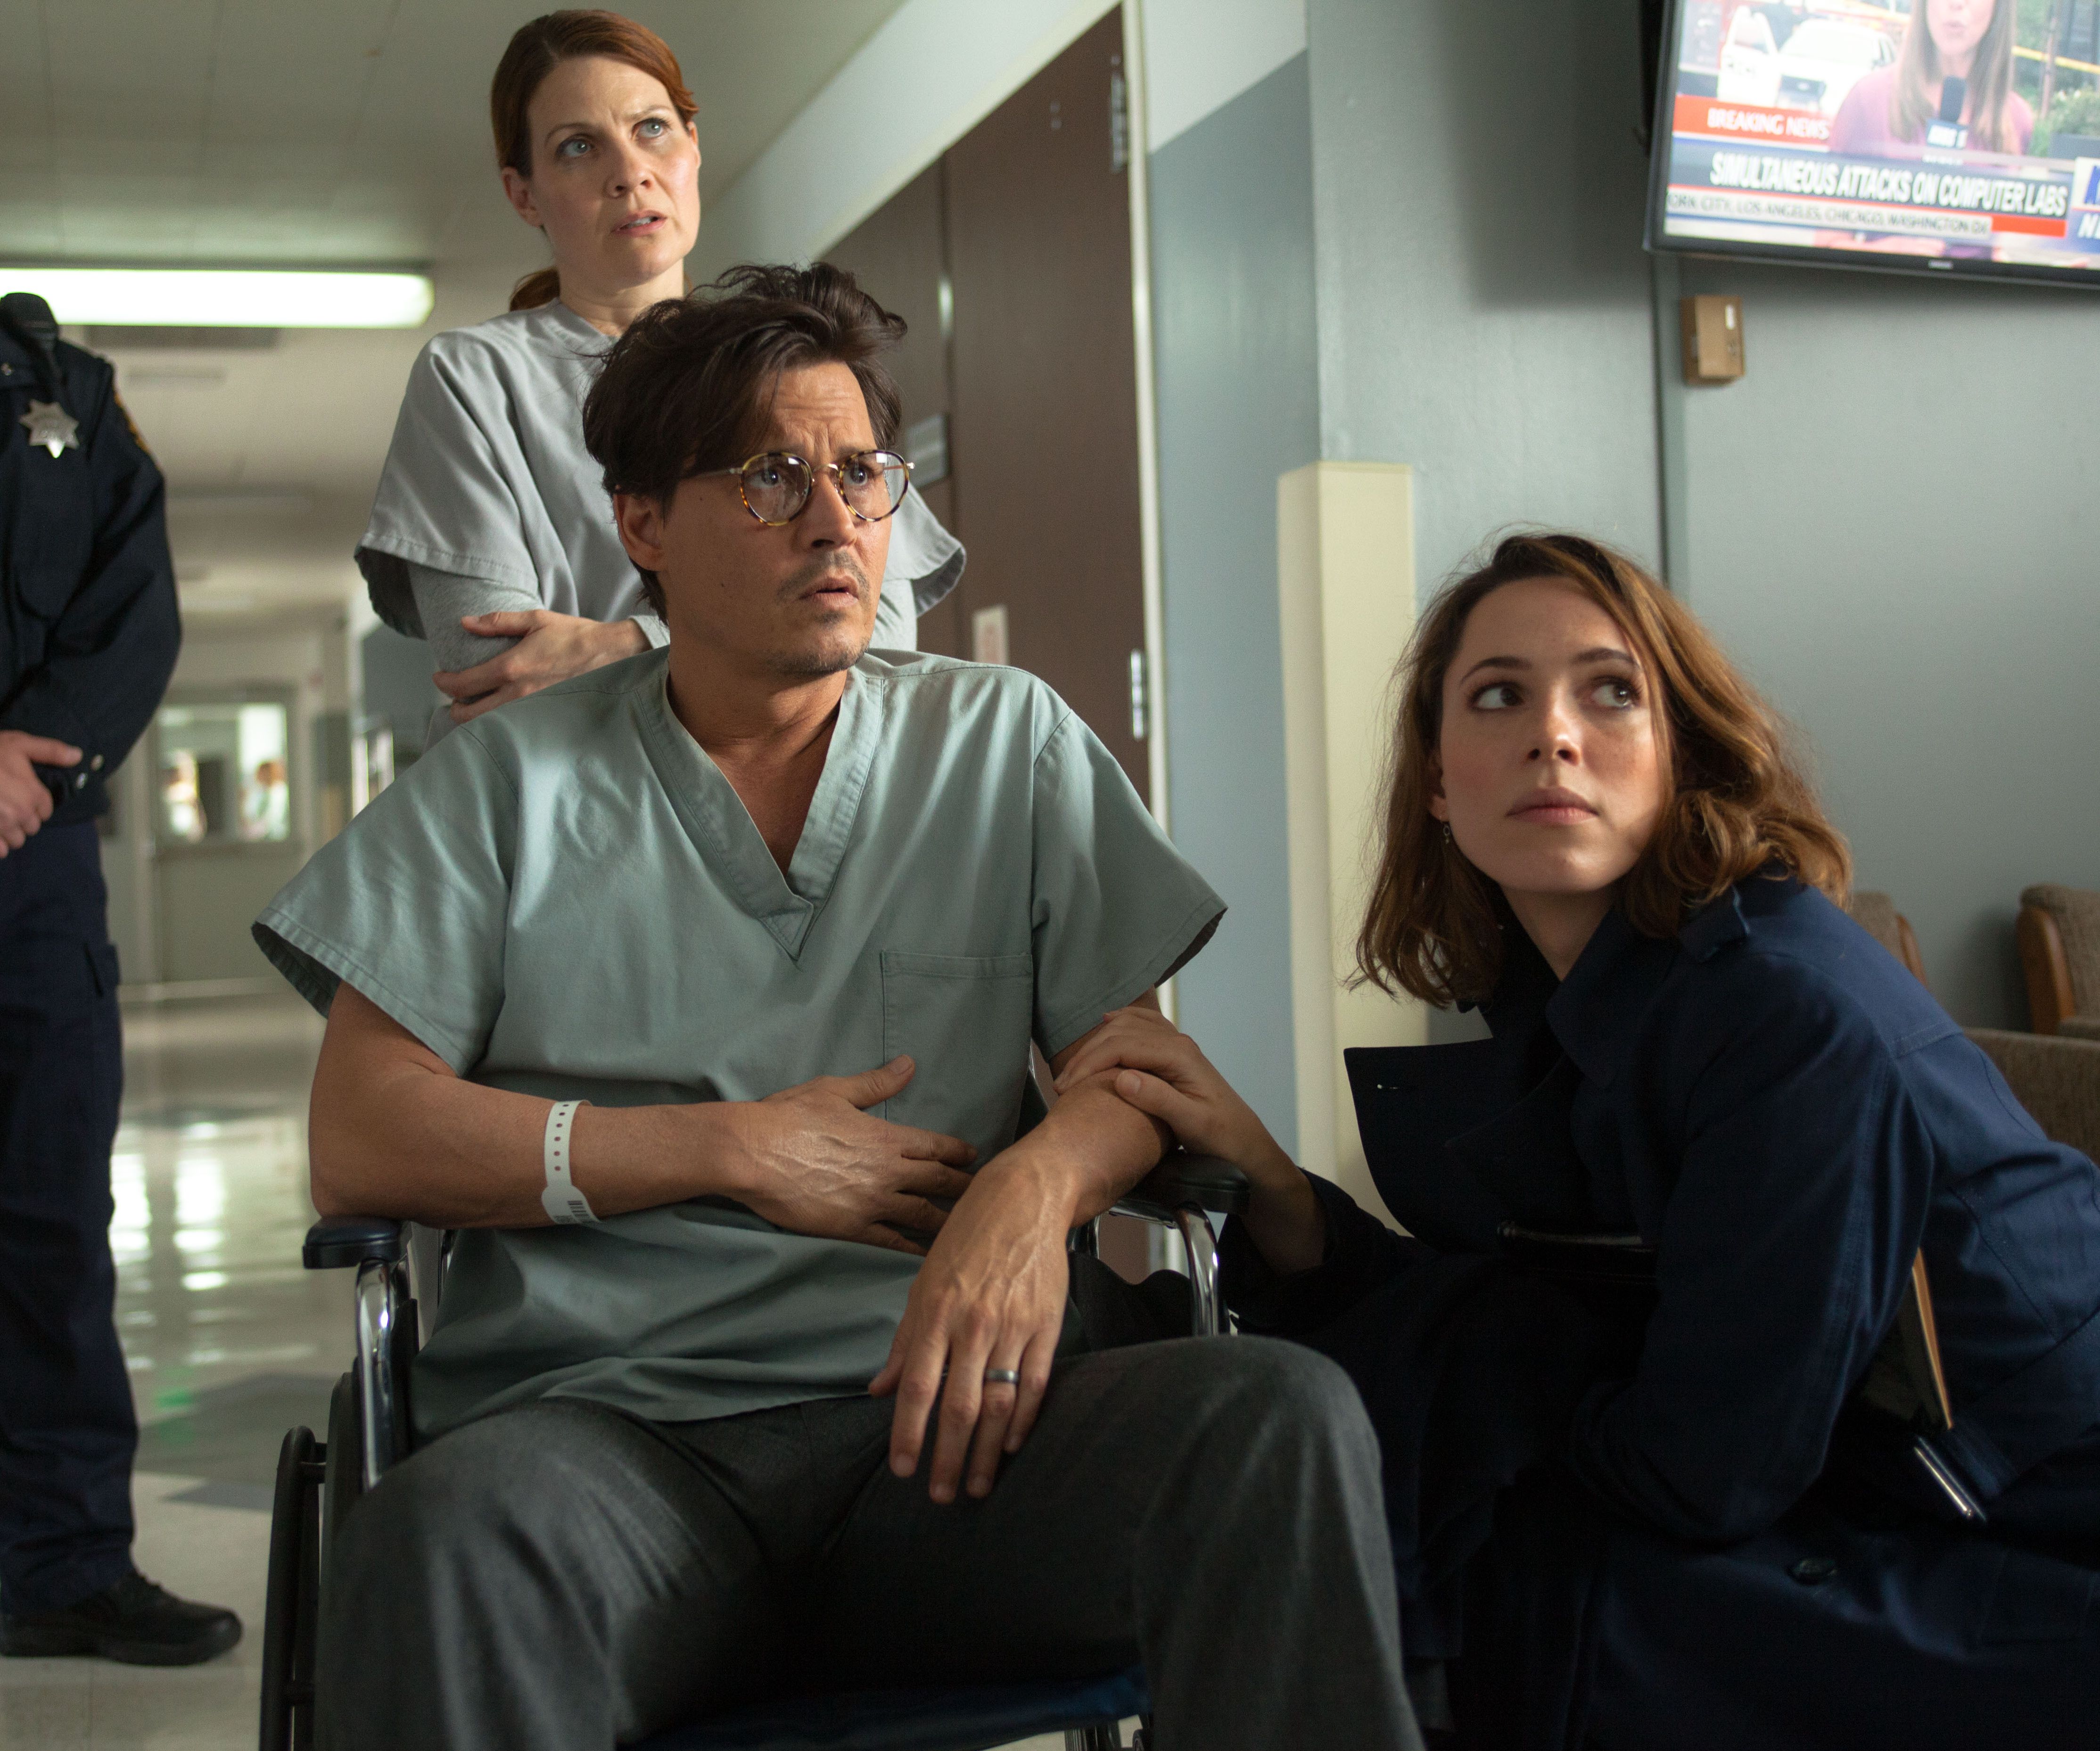 Johnny Depp with his wife in the hospital in Transcendence